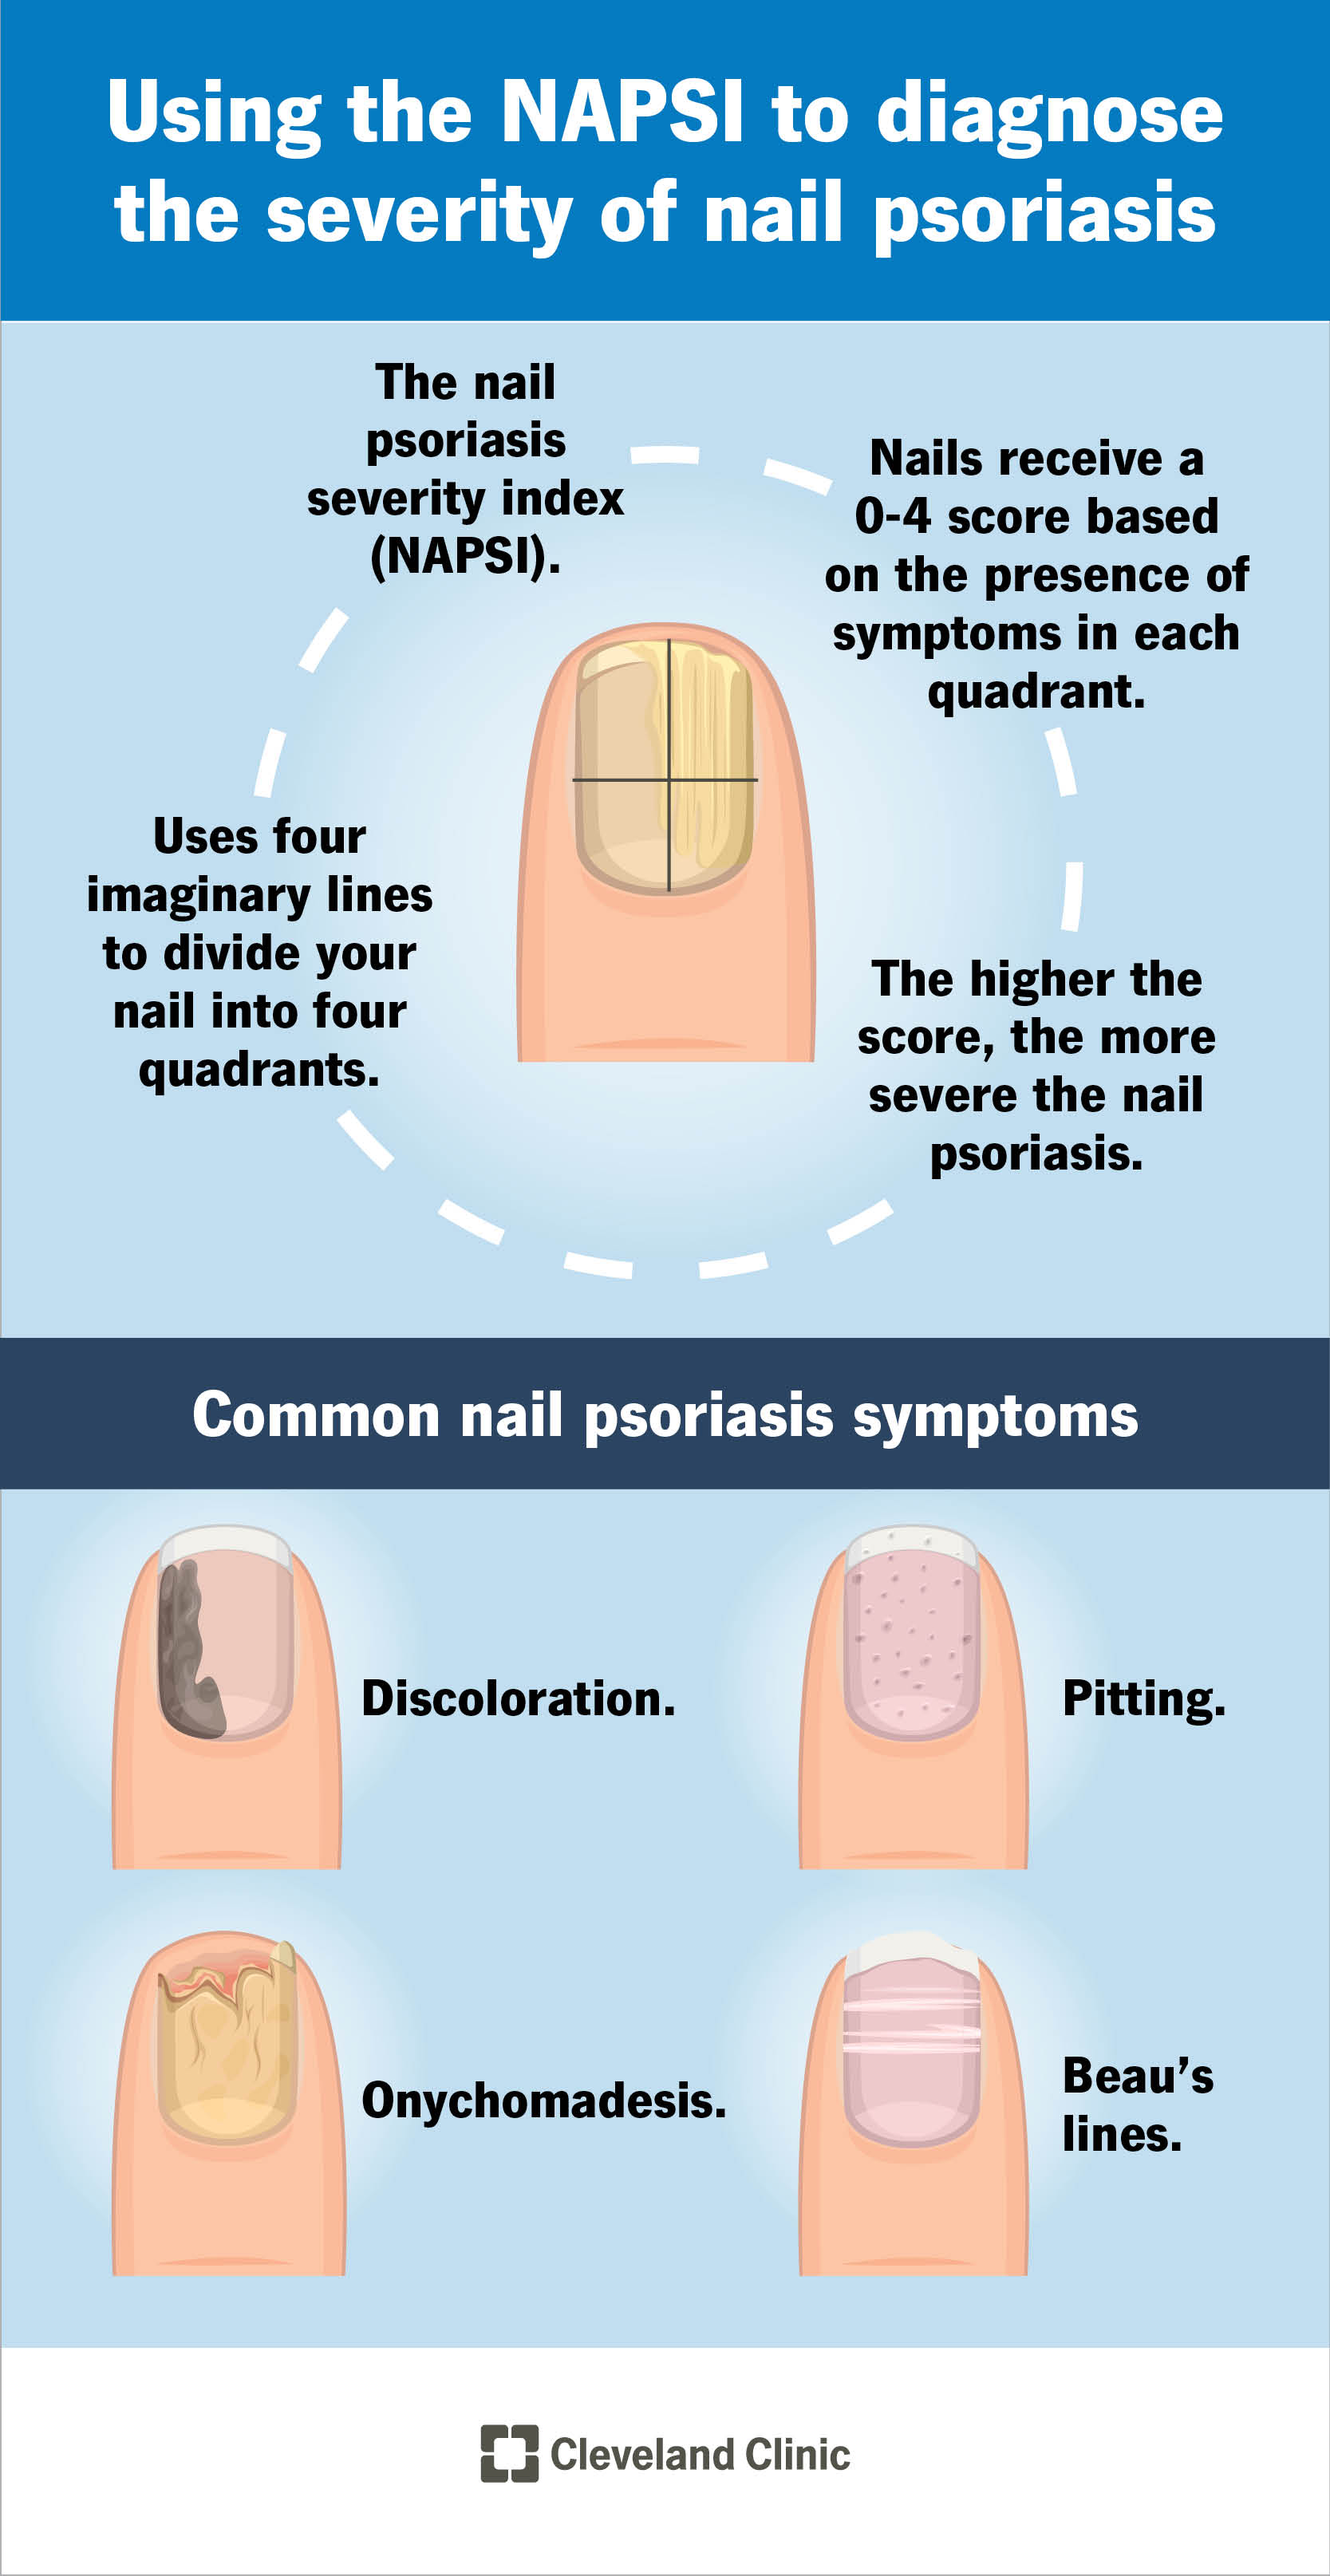 Infographic explaining how the NAPSI index is used to diagnose the severity of nail psoriasis.